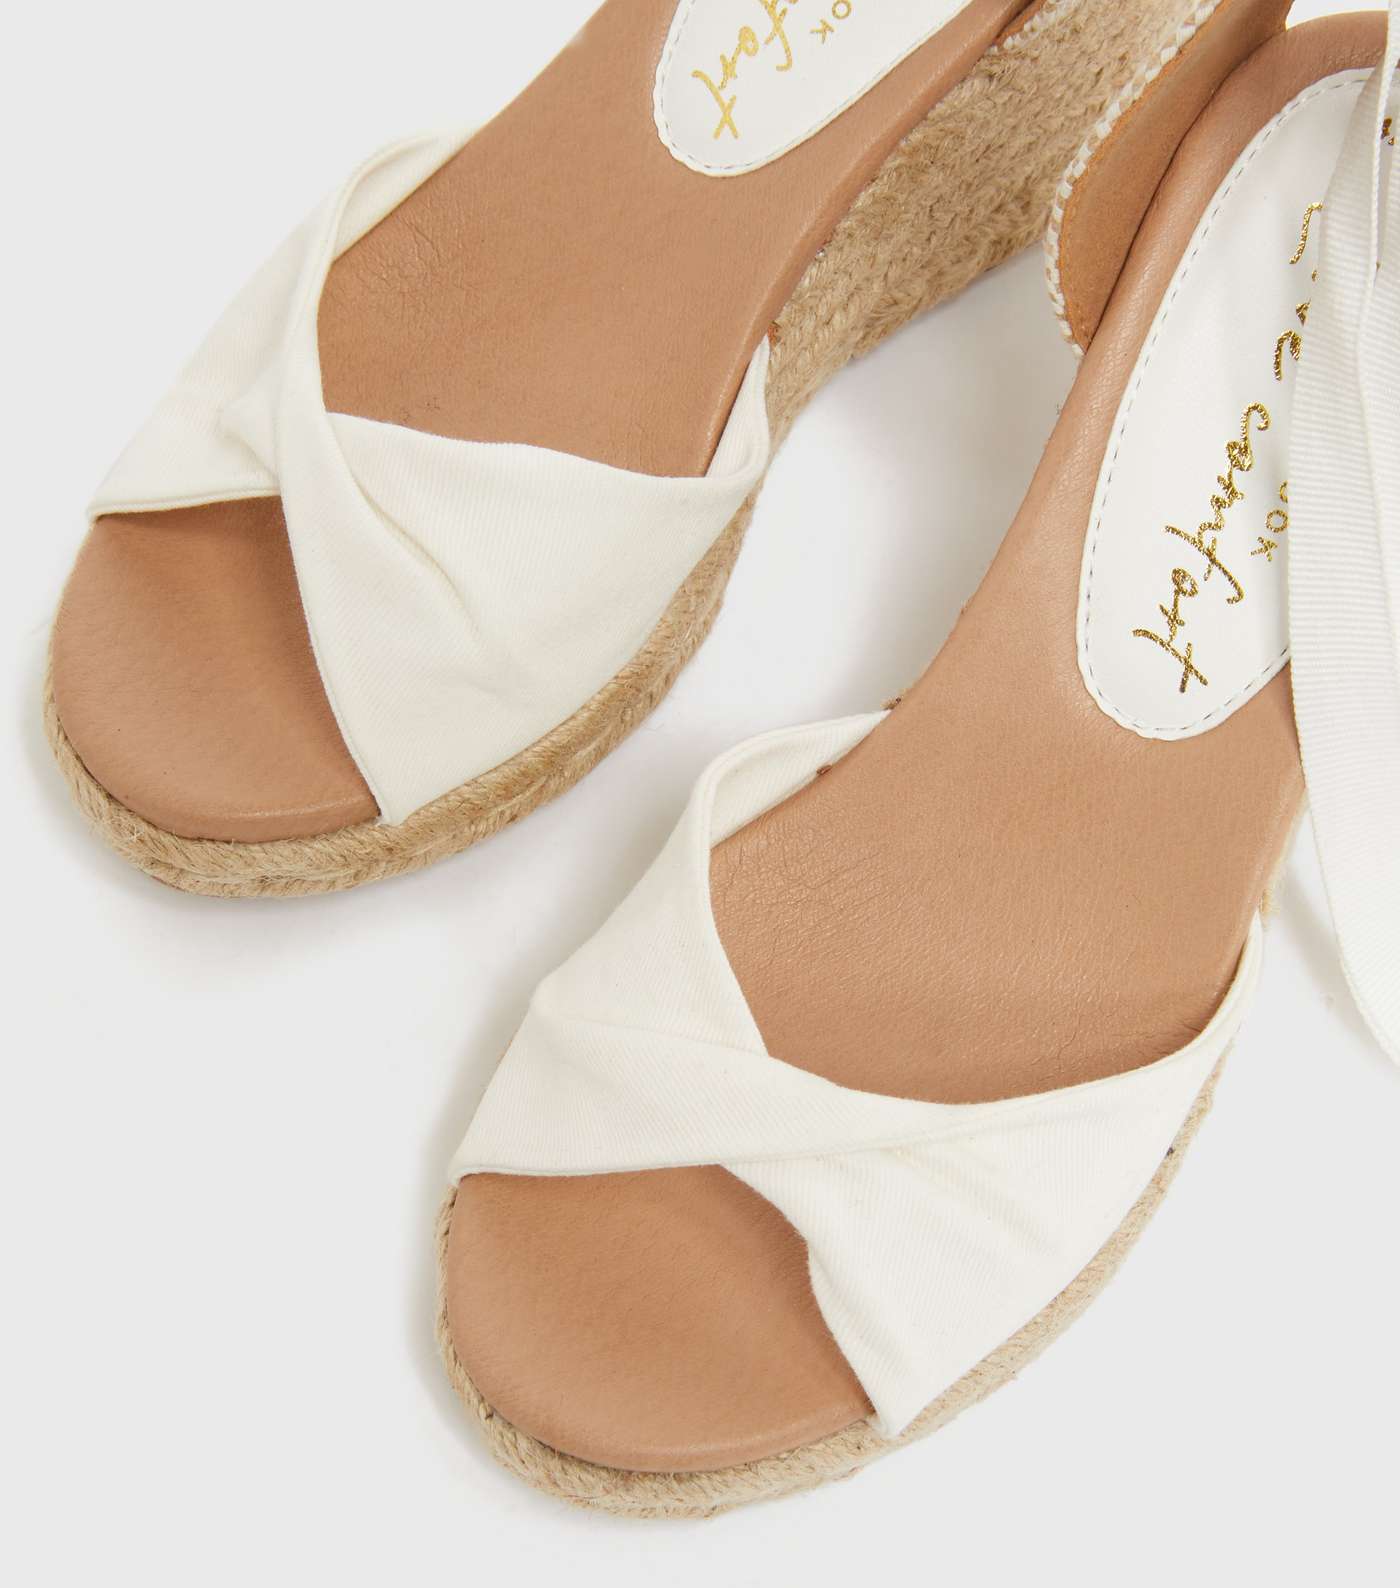 White Woven Ankle Tie Espadrille Wedges Image 4